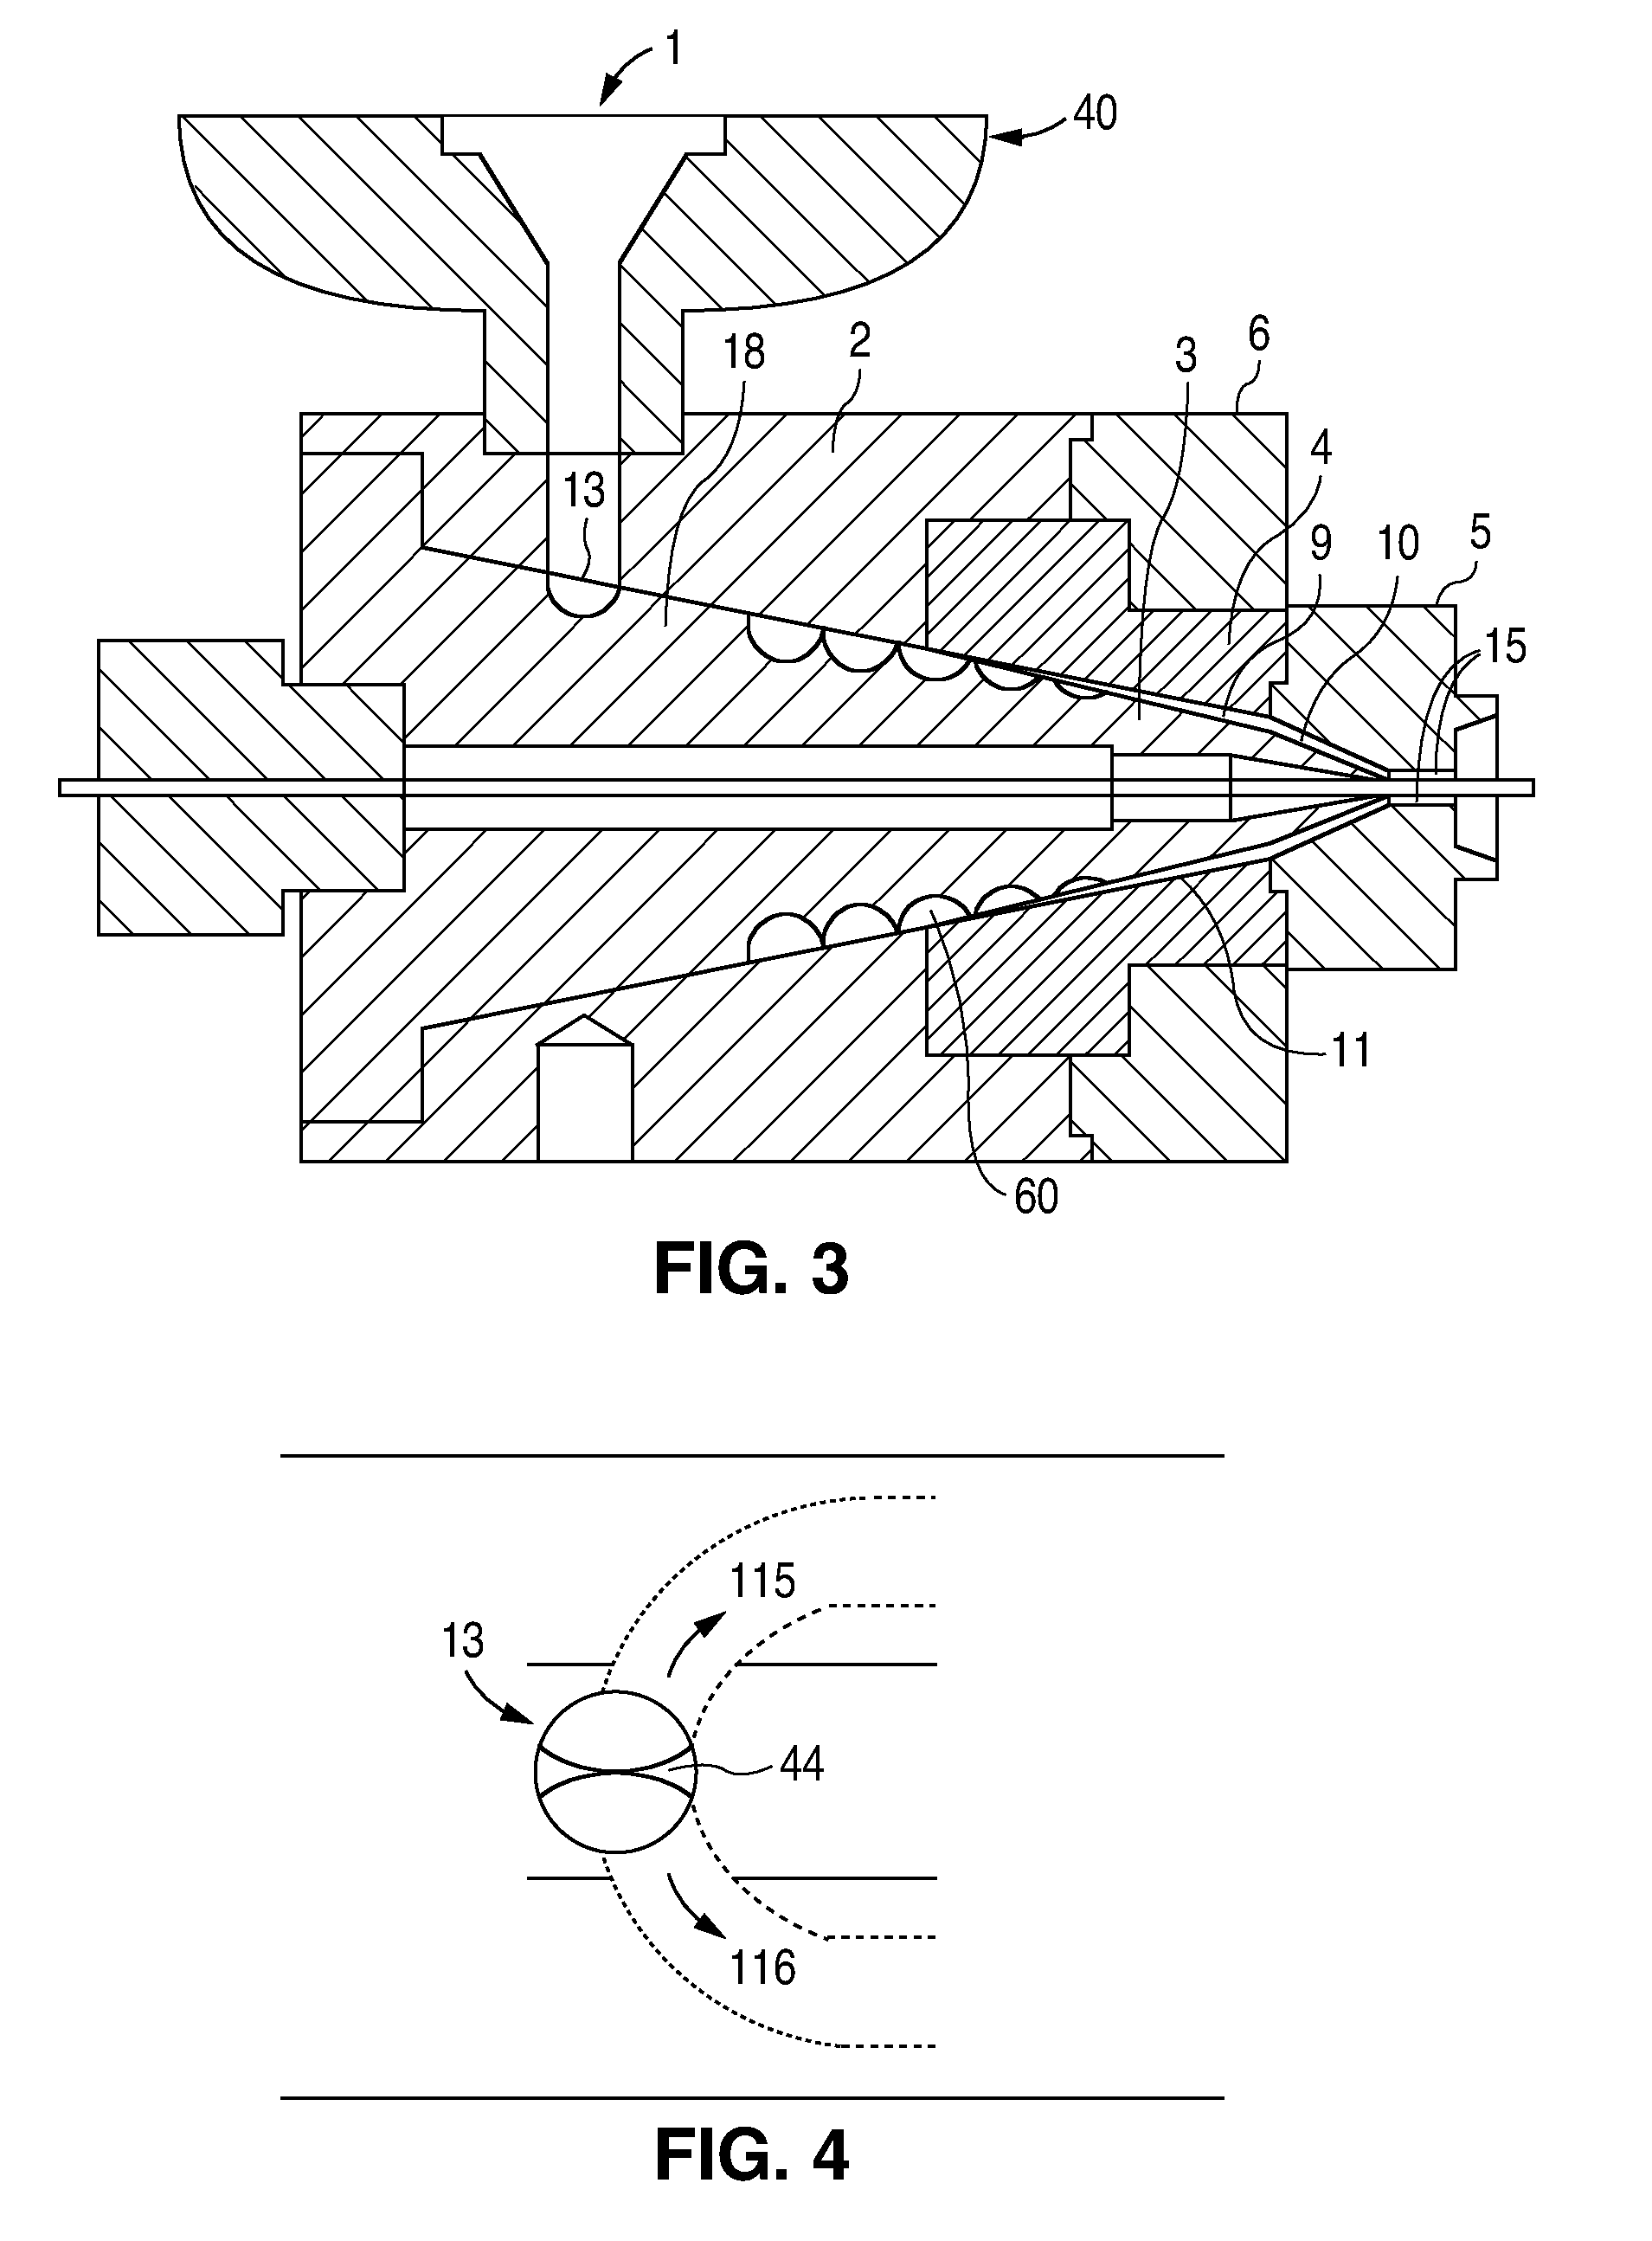 Method Of Fabricating A Low Crystallinity Poly(L-Lactide) Tube